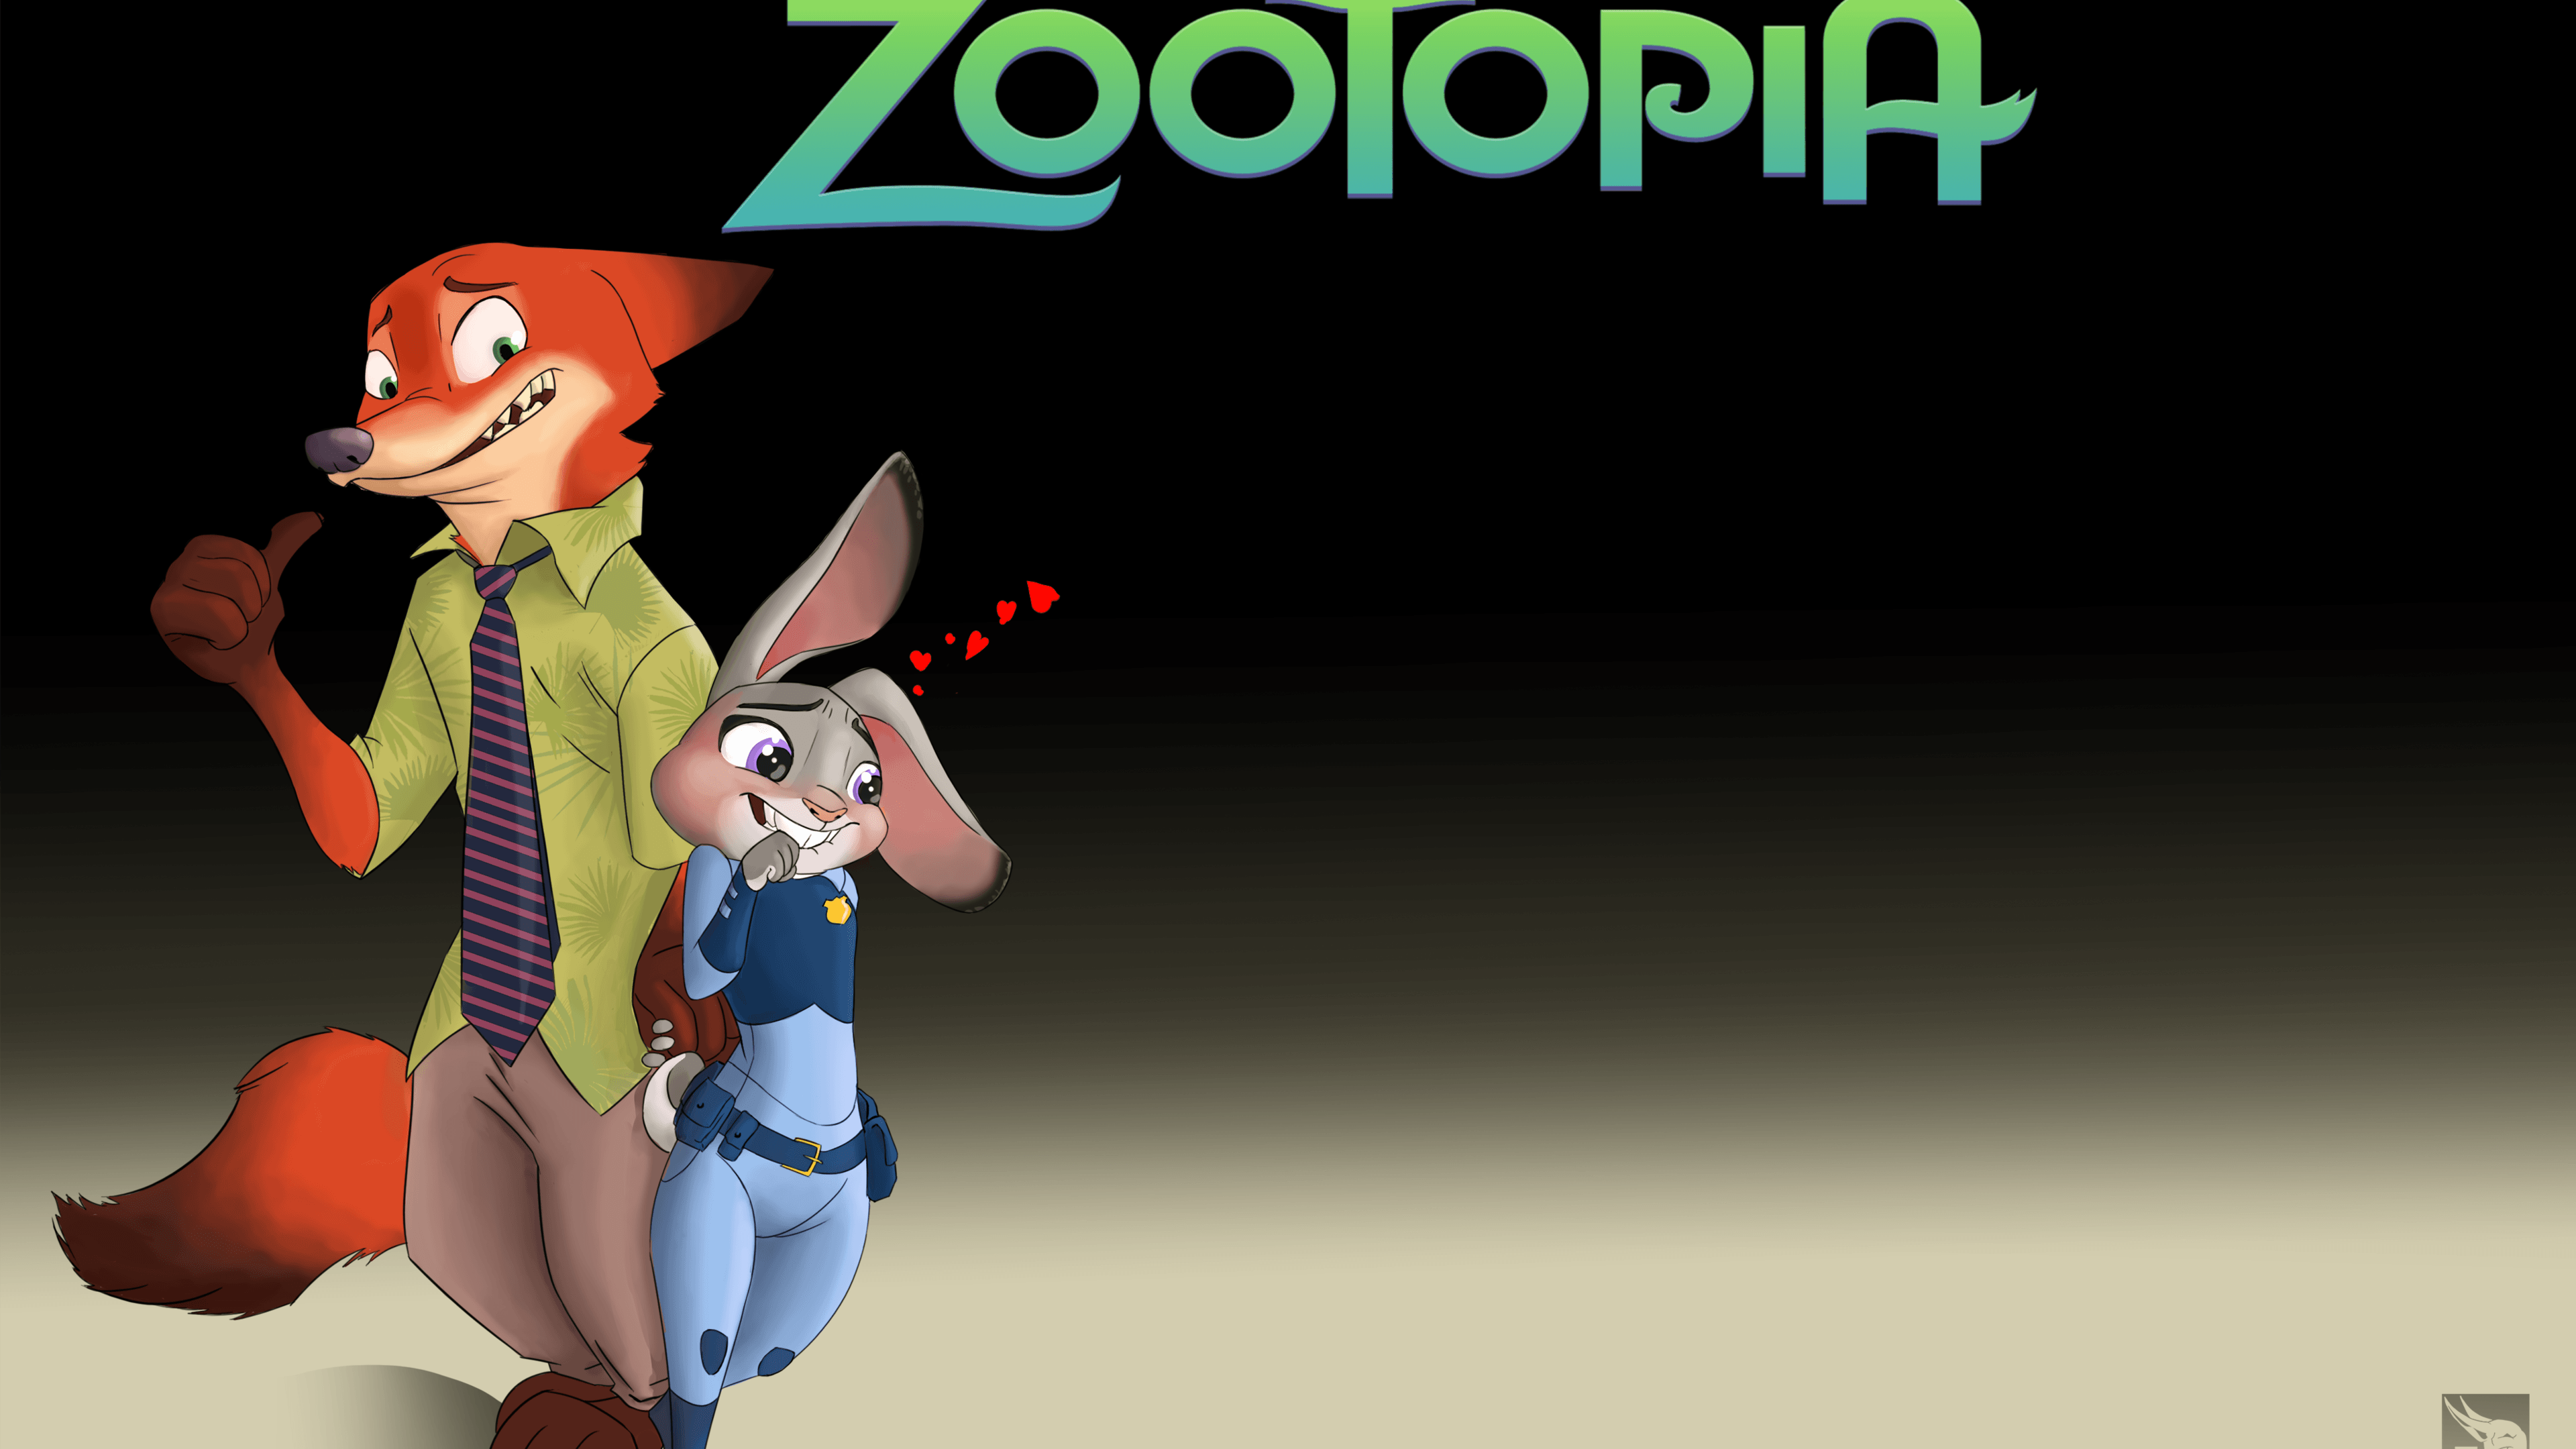 Zootopia Movie Poster, HD Movies, 4k Wallpaper, Image, Background